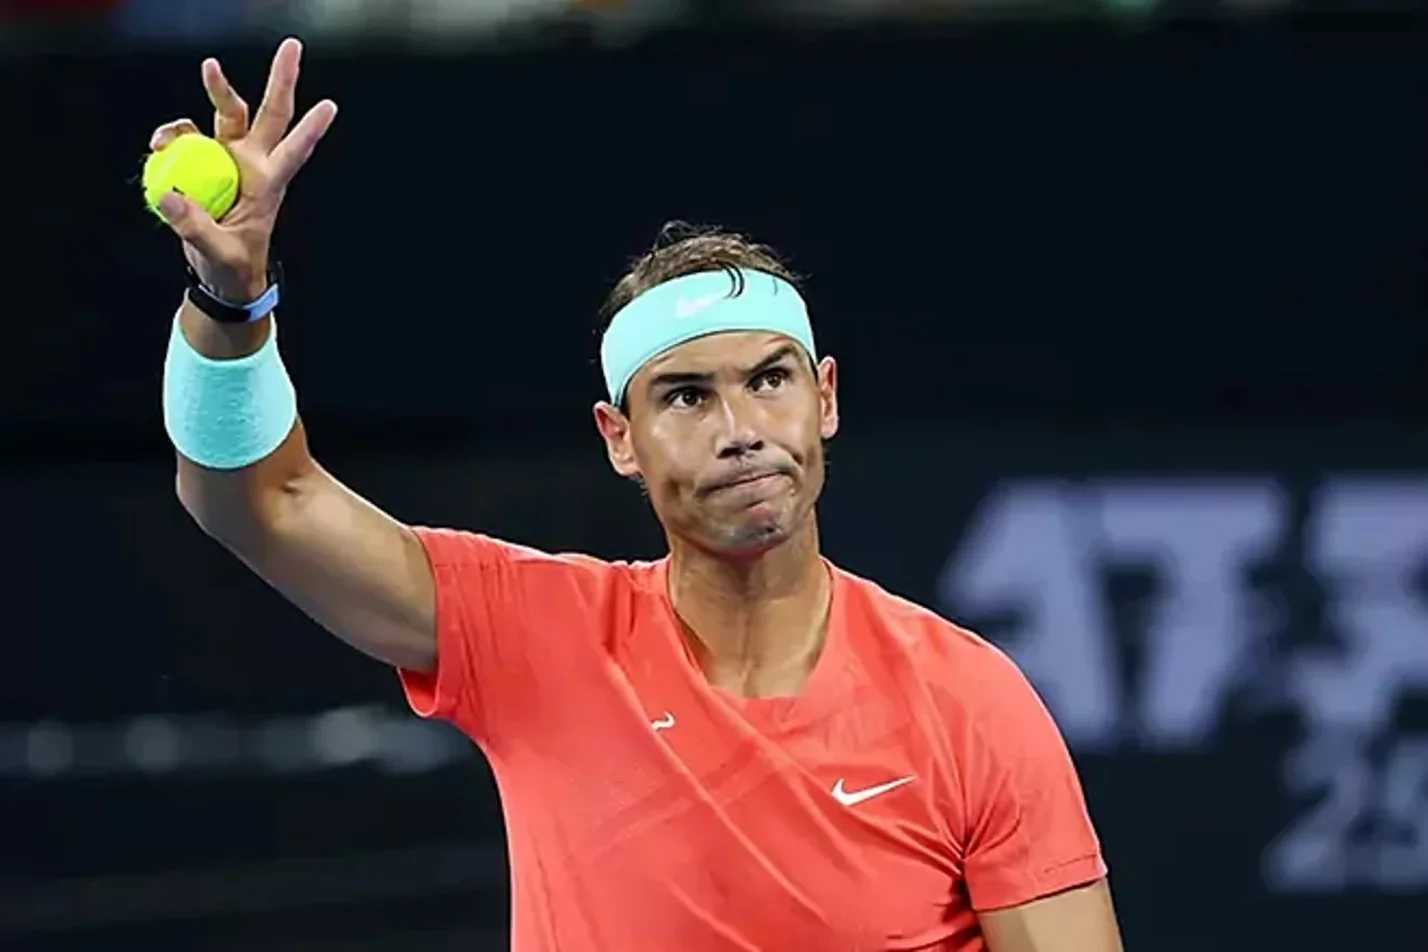 Nadal’s Brisbane Comeback Ends in Heartbreak with Missed Match Points and Medical Timeout